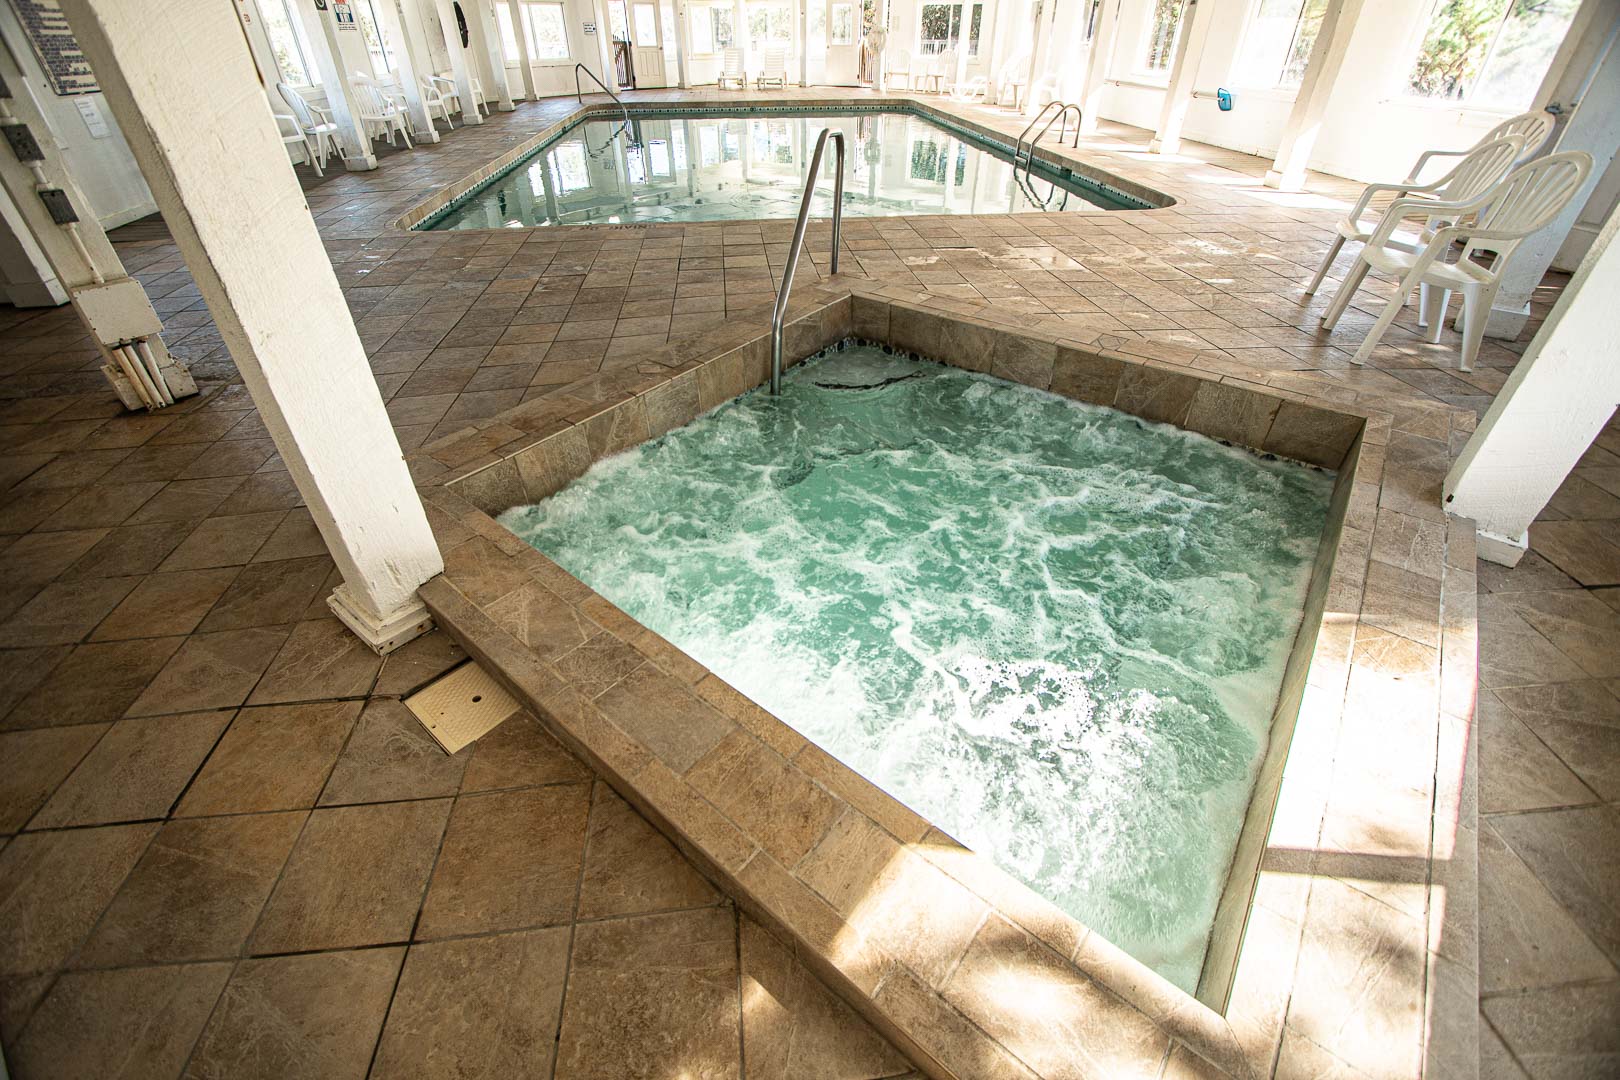 An indoor jacuzzi at VRI's Barrier Island Station in North Carolina.